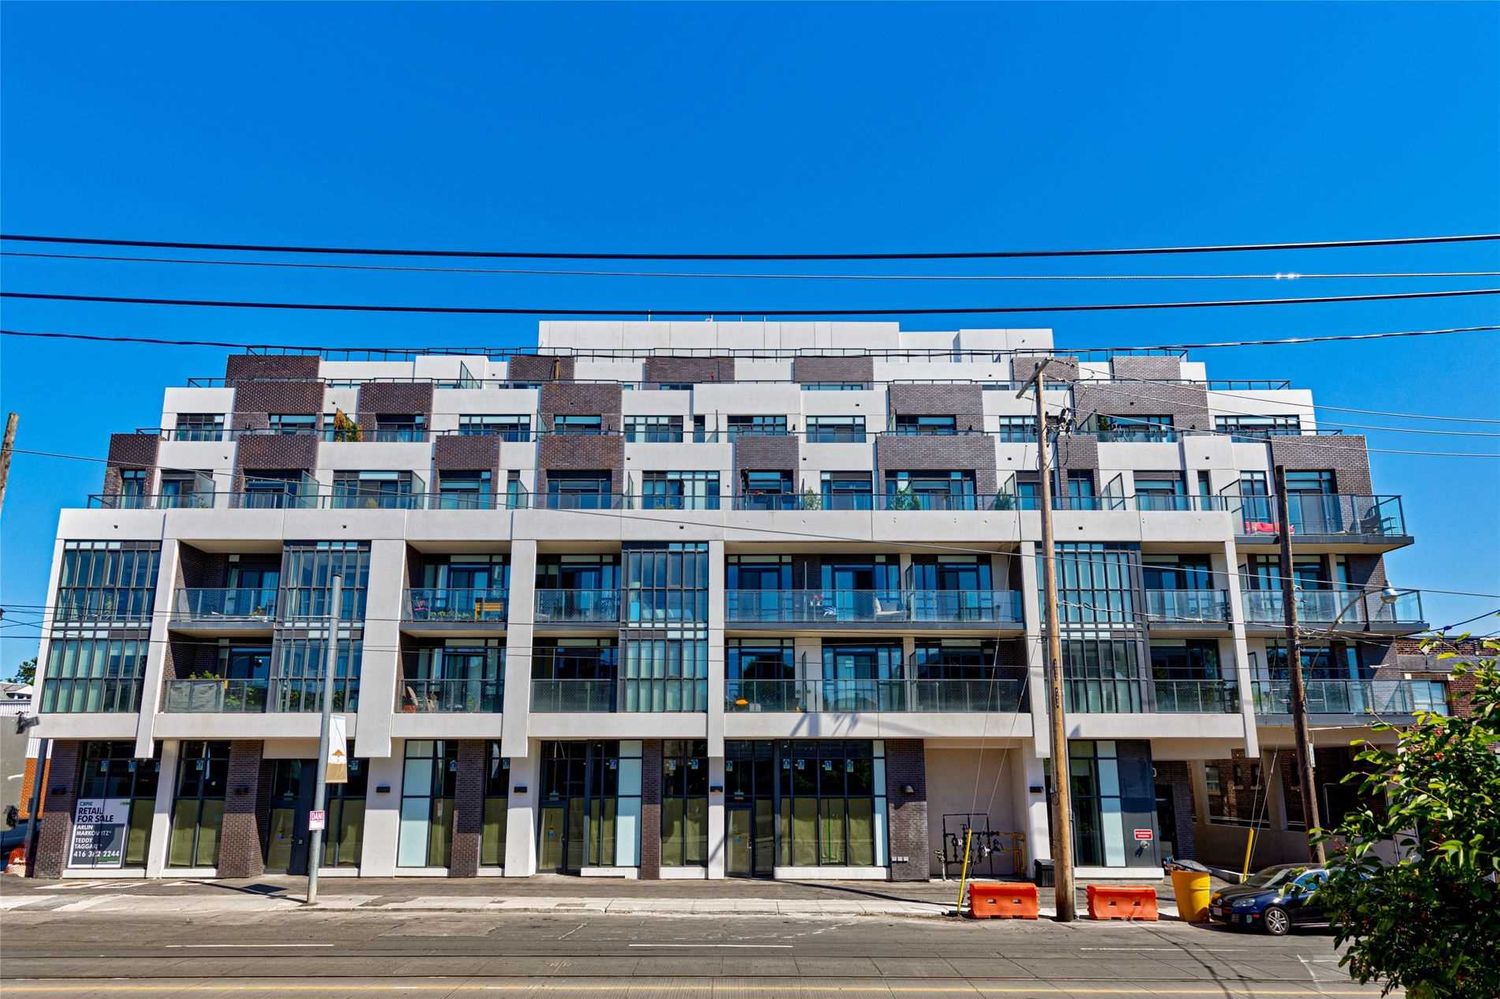 1630 Queen Street E. WestBeach Condos is located in  East End, Toronto - image #2 of 4